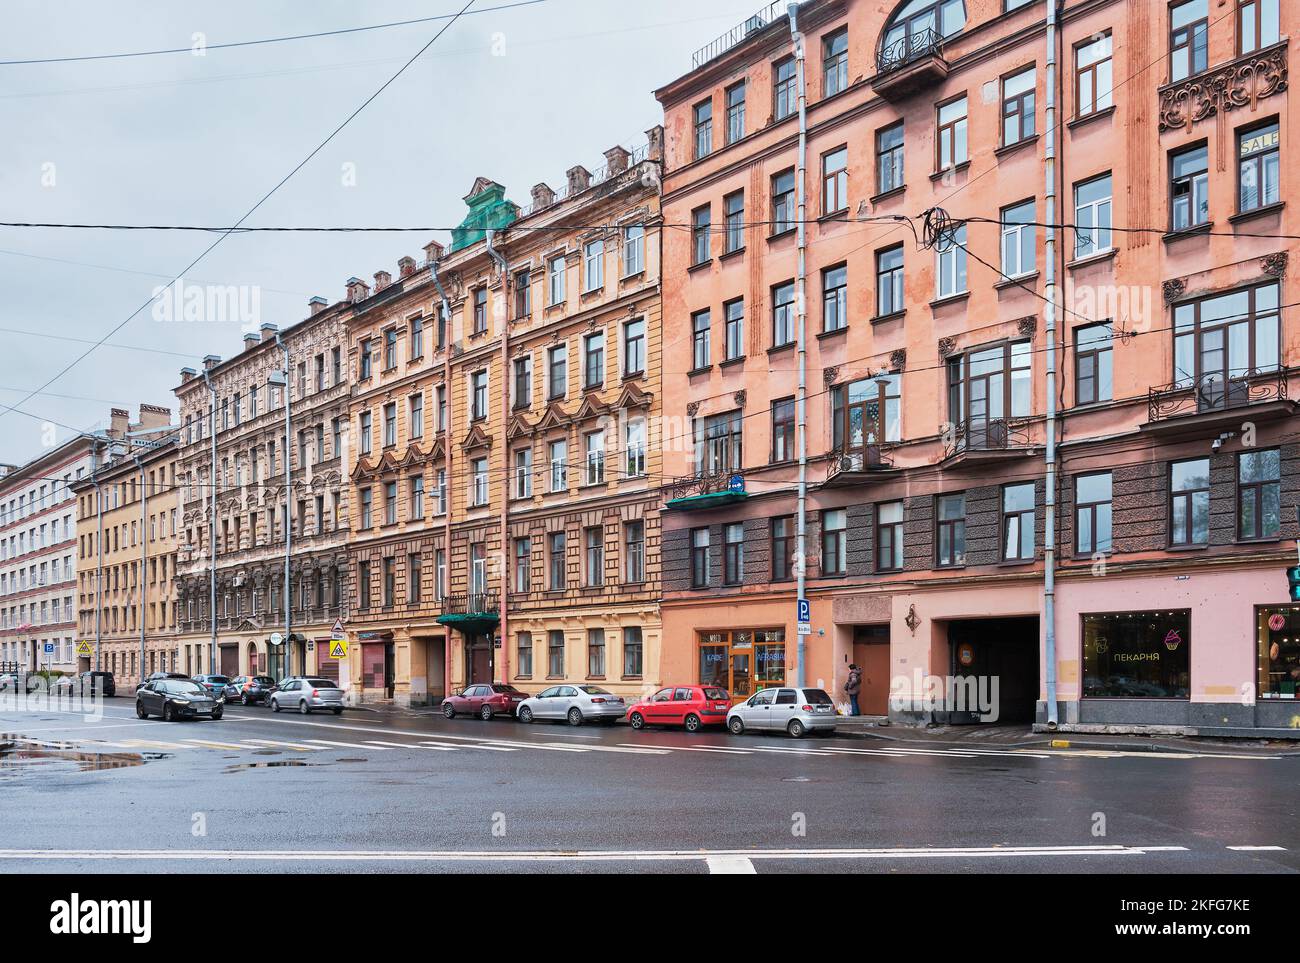 Hersonskaya Street, view of the old profitable houses, early 20th century, now residential buildings, cityscape: St. Petersburg, Russia - October 06, Stock Photo